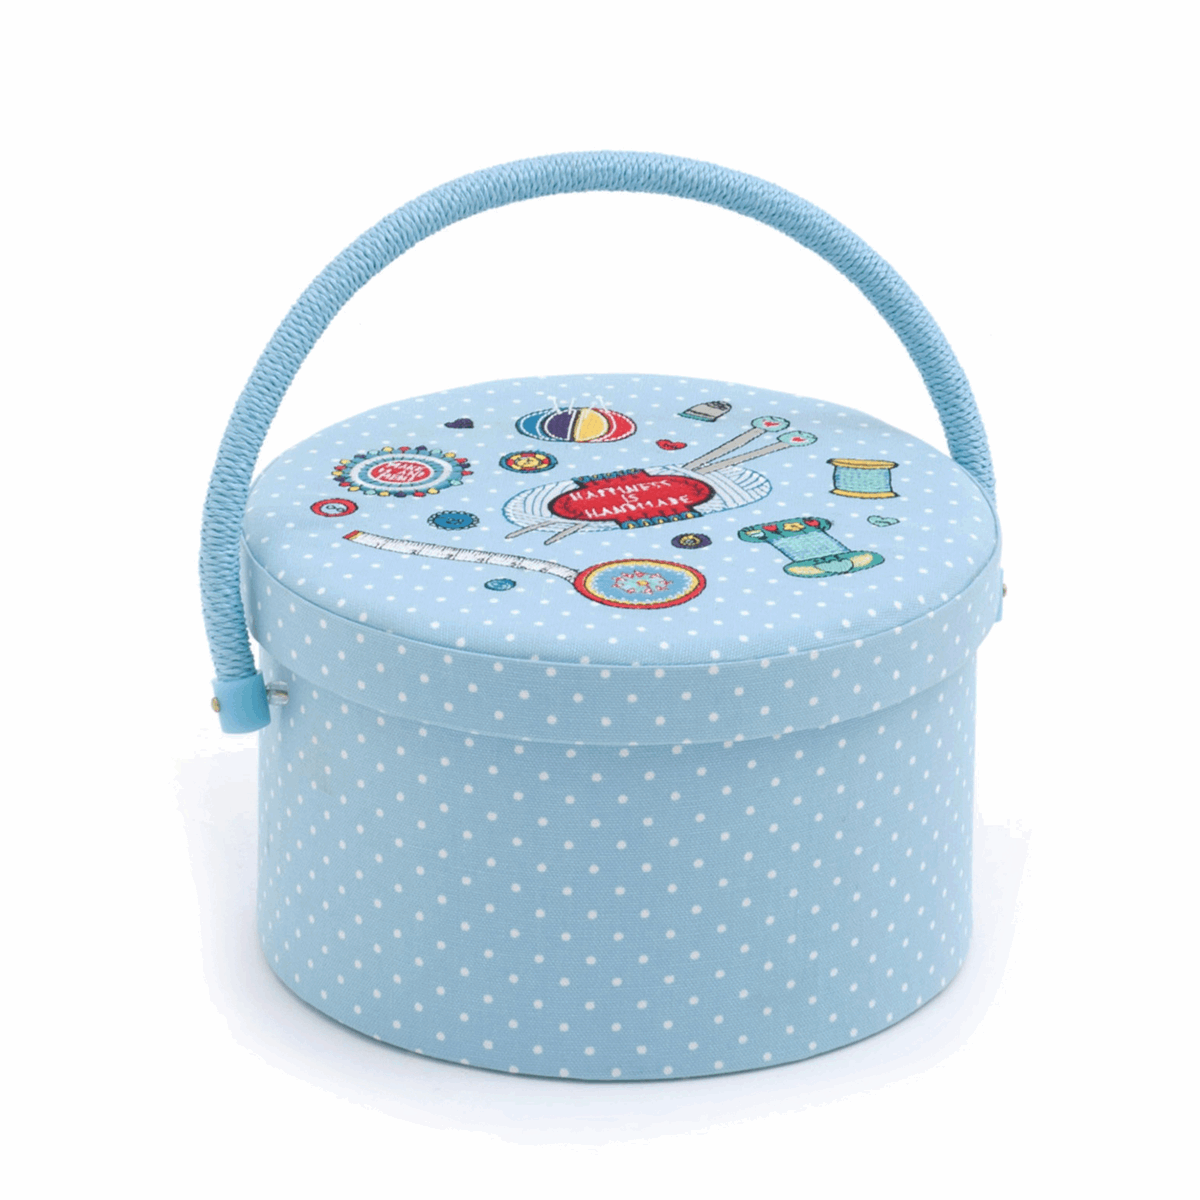 Notions Embroidered Sewing Box - Small Round